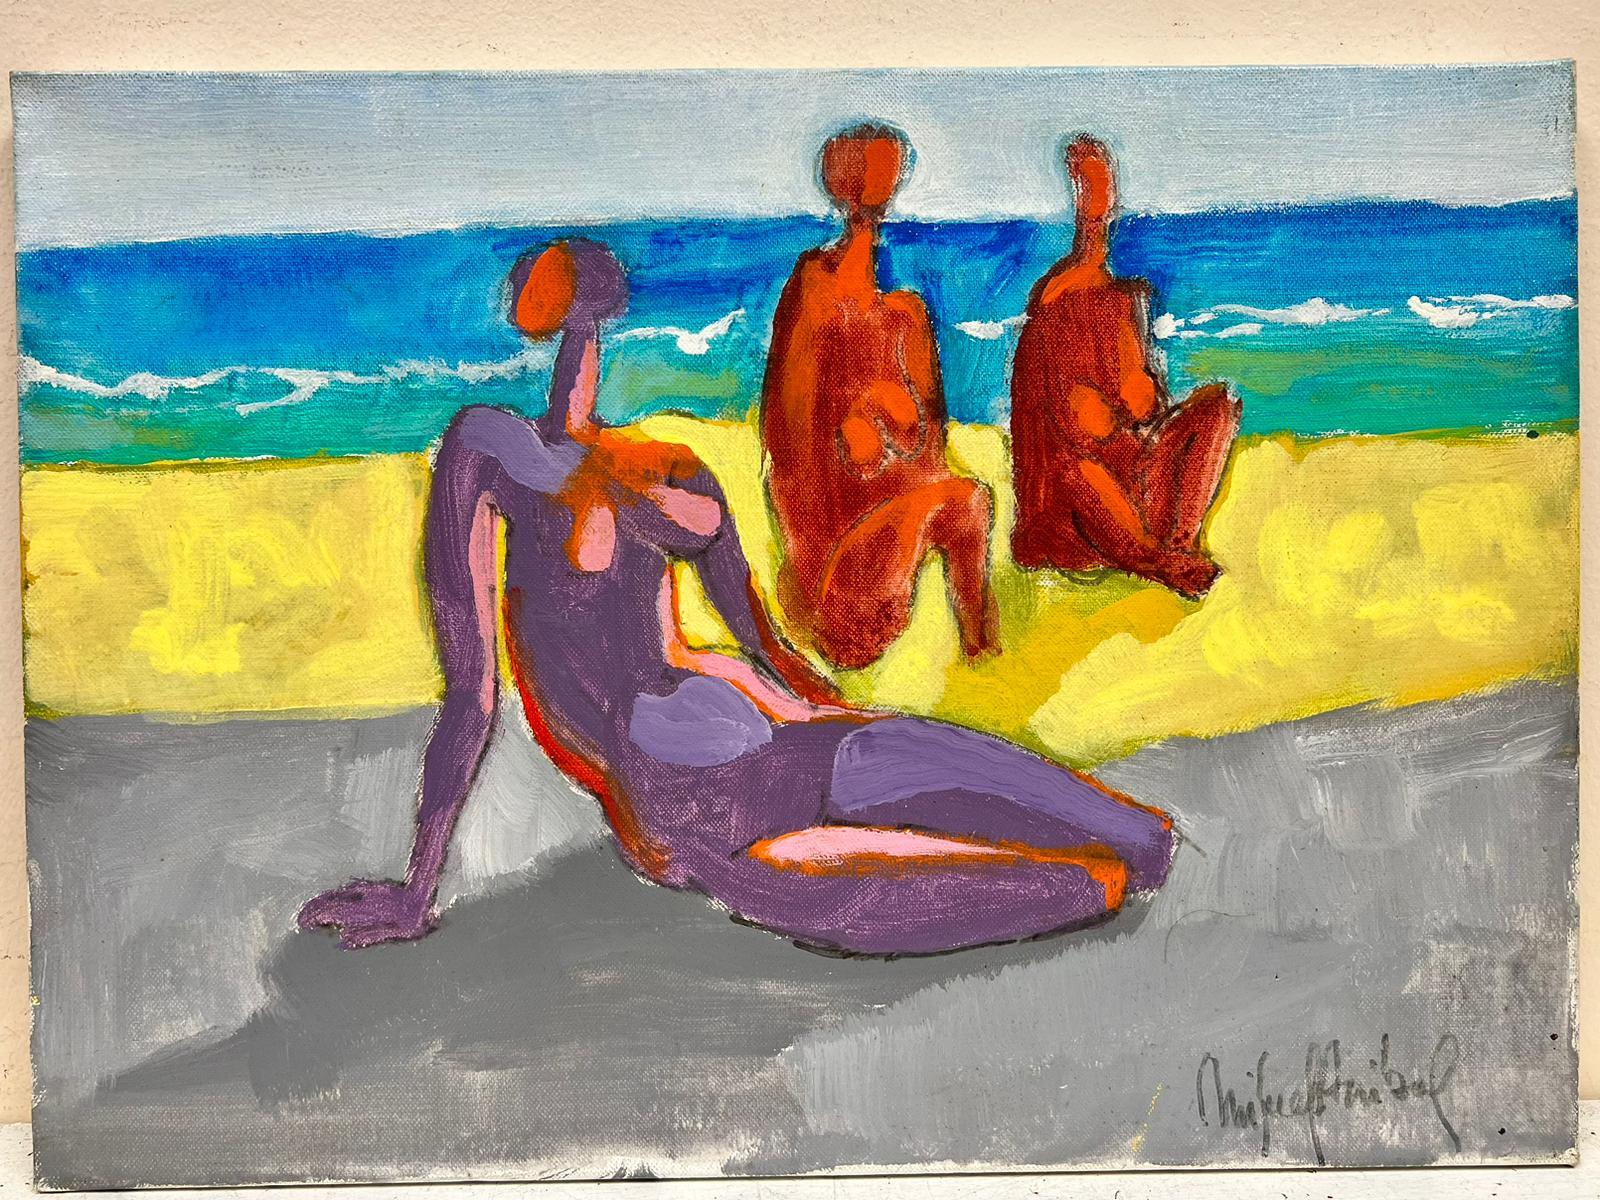 Nudes on the Beach
Miguel Anibal (Chile, b. 1935), signed
Miguel Anibal is a painter, fresco artist and engraver born in 1935 in Chile. He lived in Mexico between 1960 and 1972, where he exhibited in numerous galleries. With the arrival of Pinochet